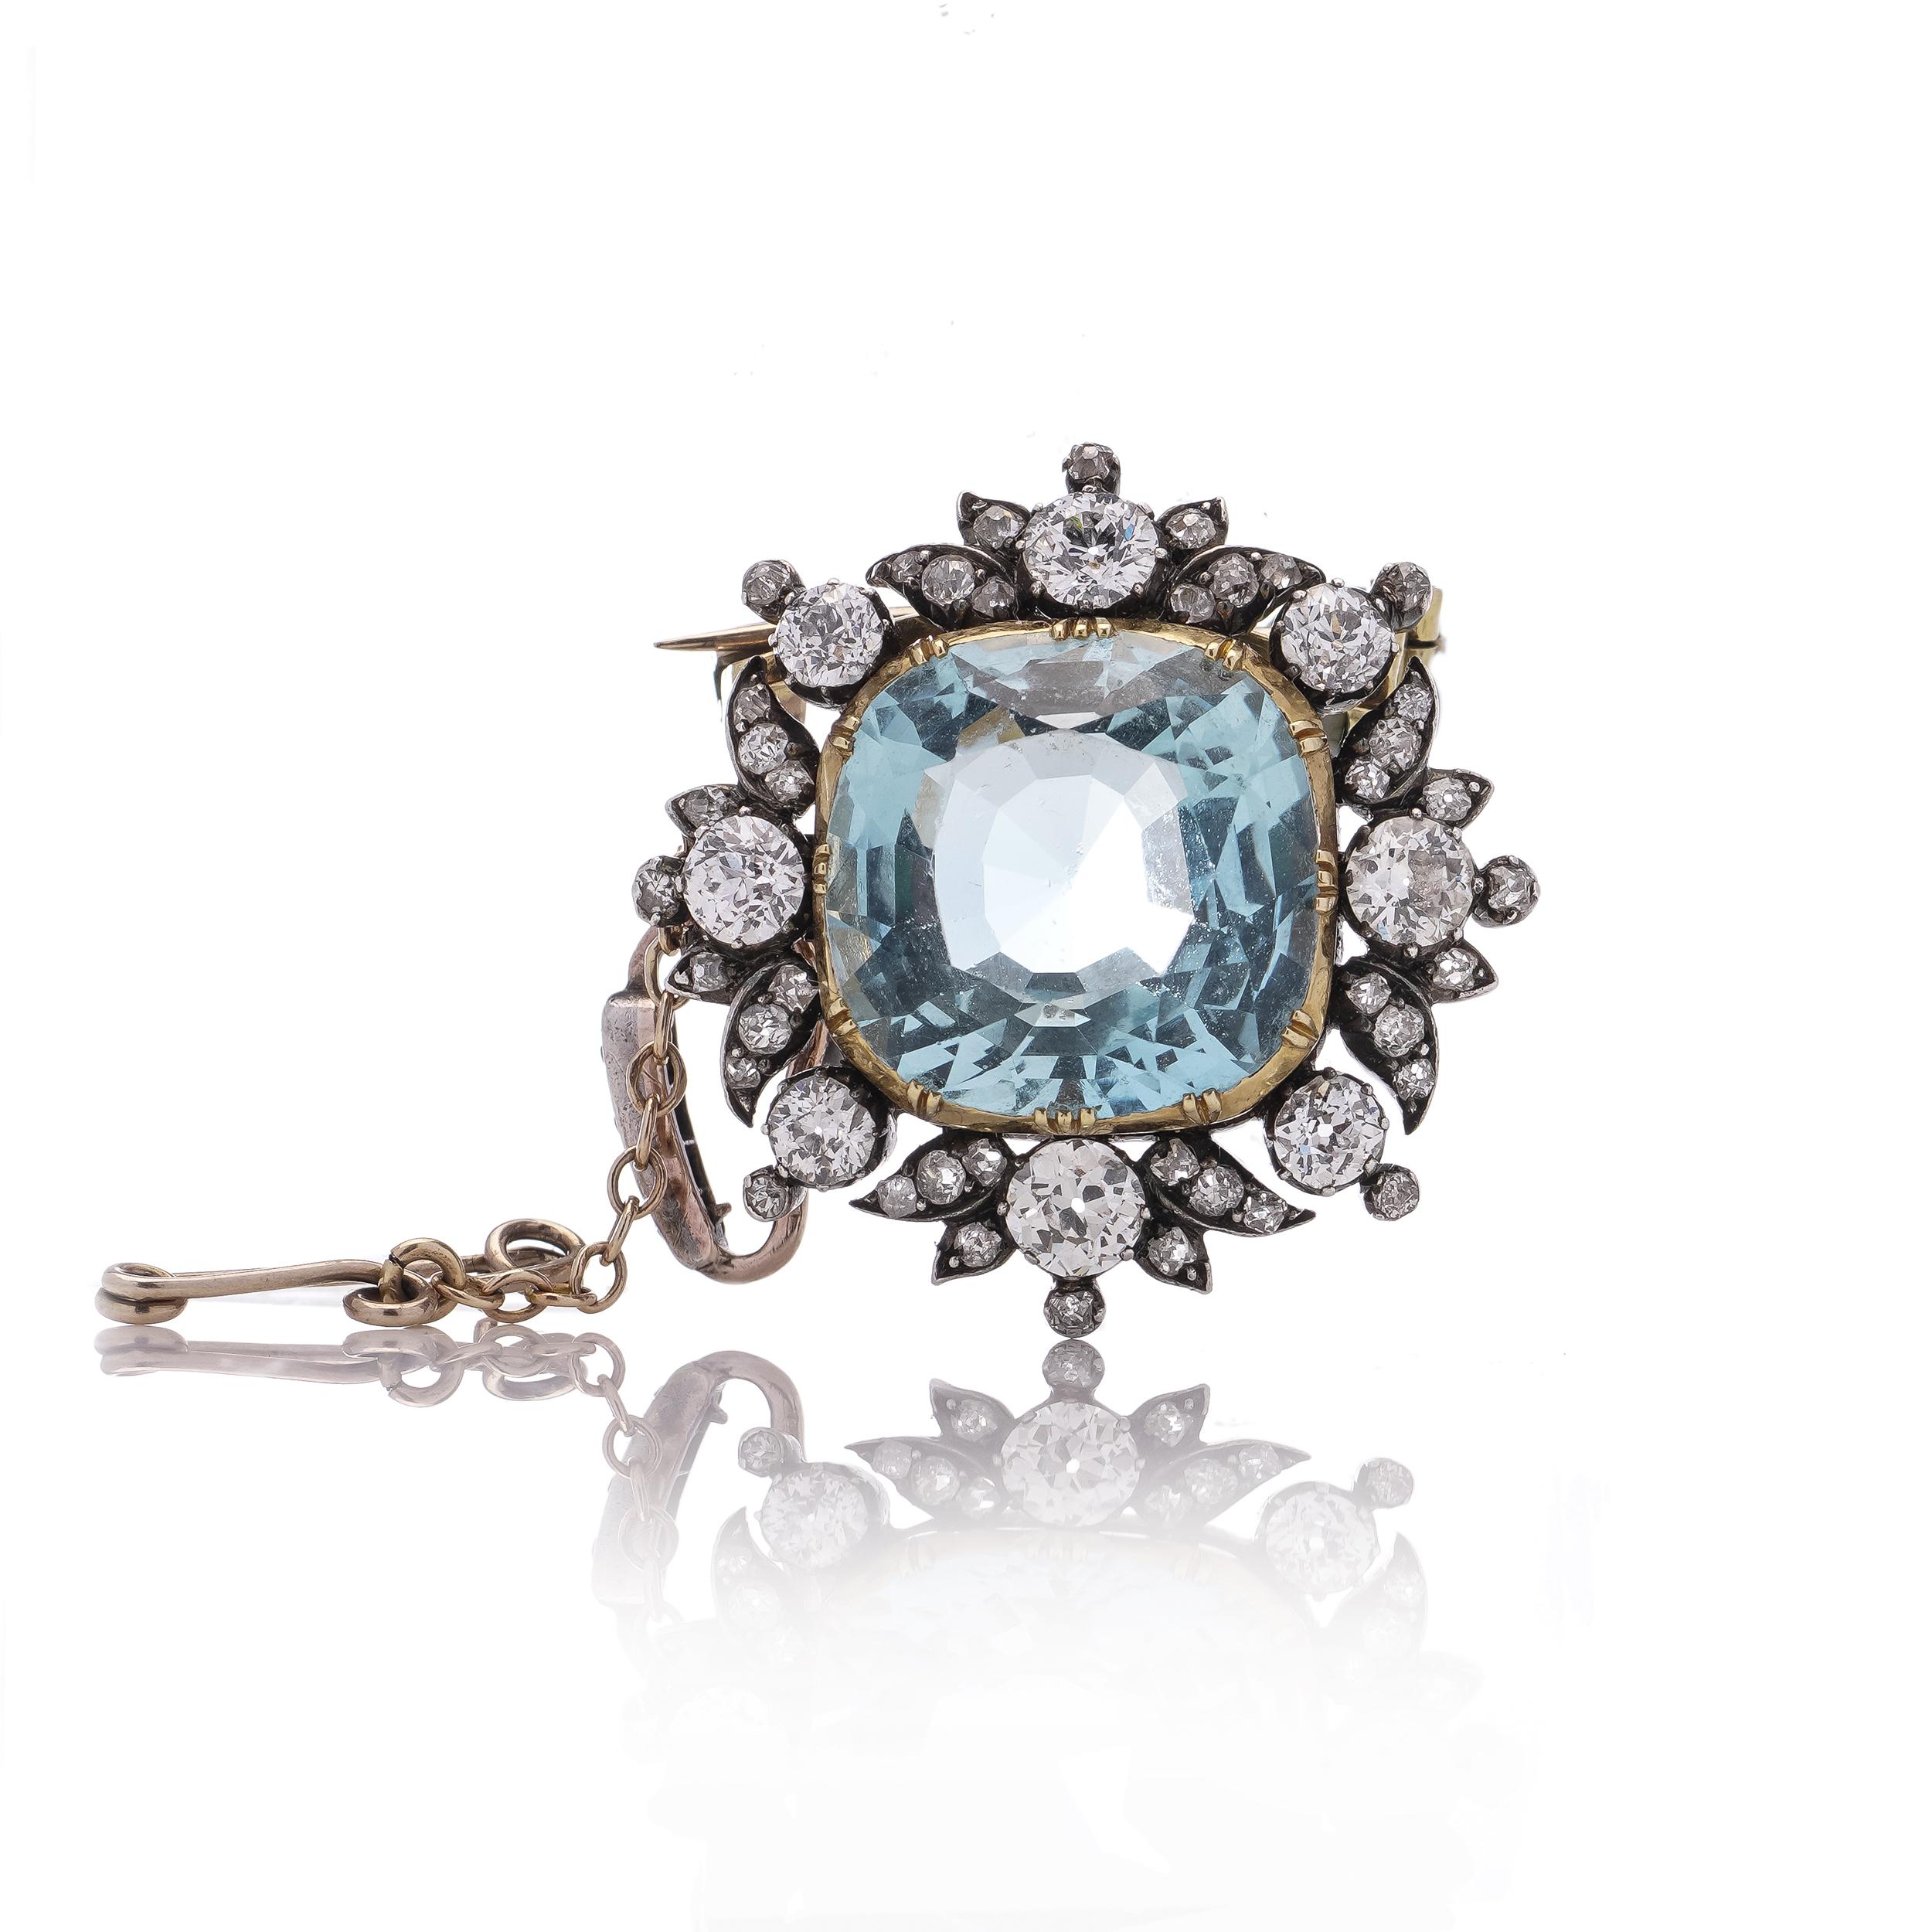 Women's or Men's 19th Century 9kt gold and silver 7.17 cts. of cushion-cut Aquamarine brooch For Sale